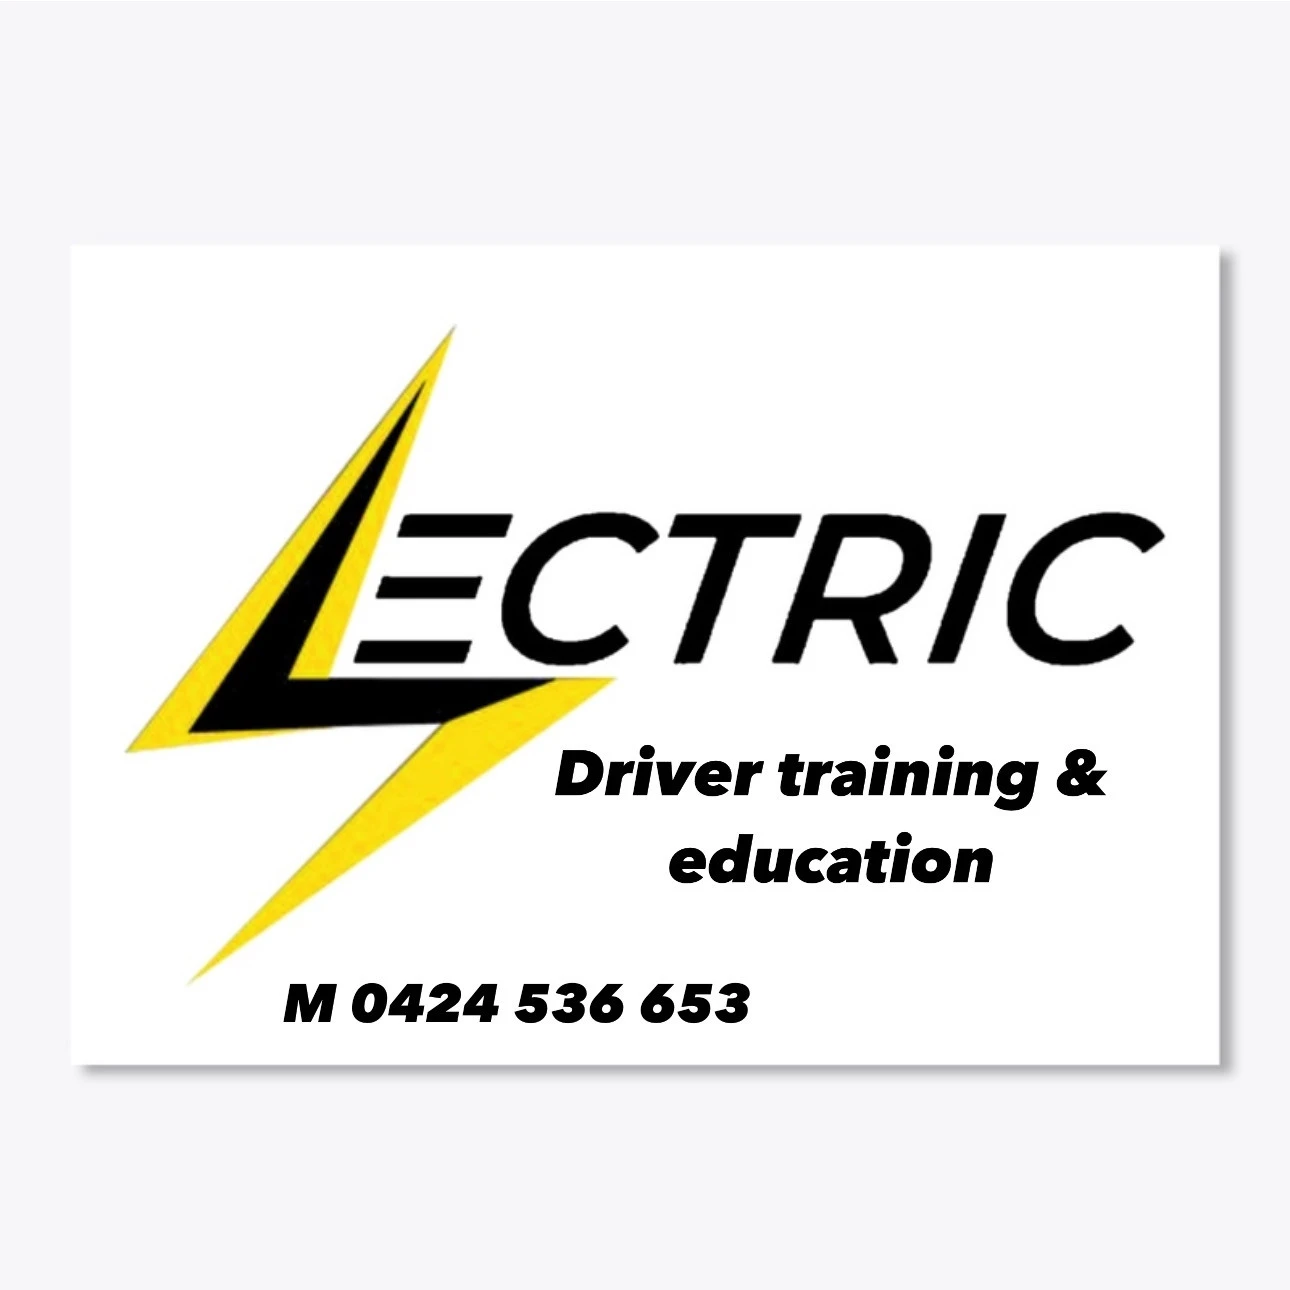 Lectric Driver Training